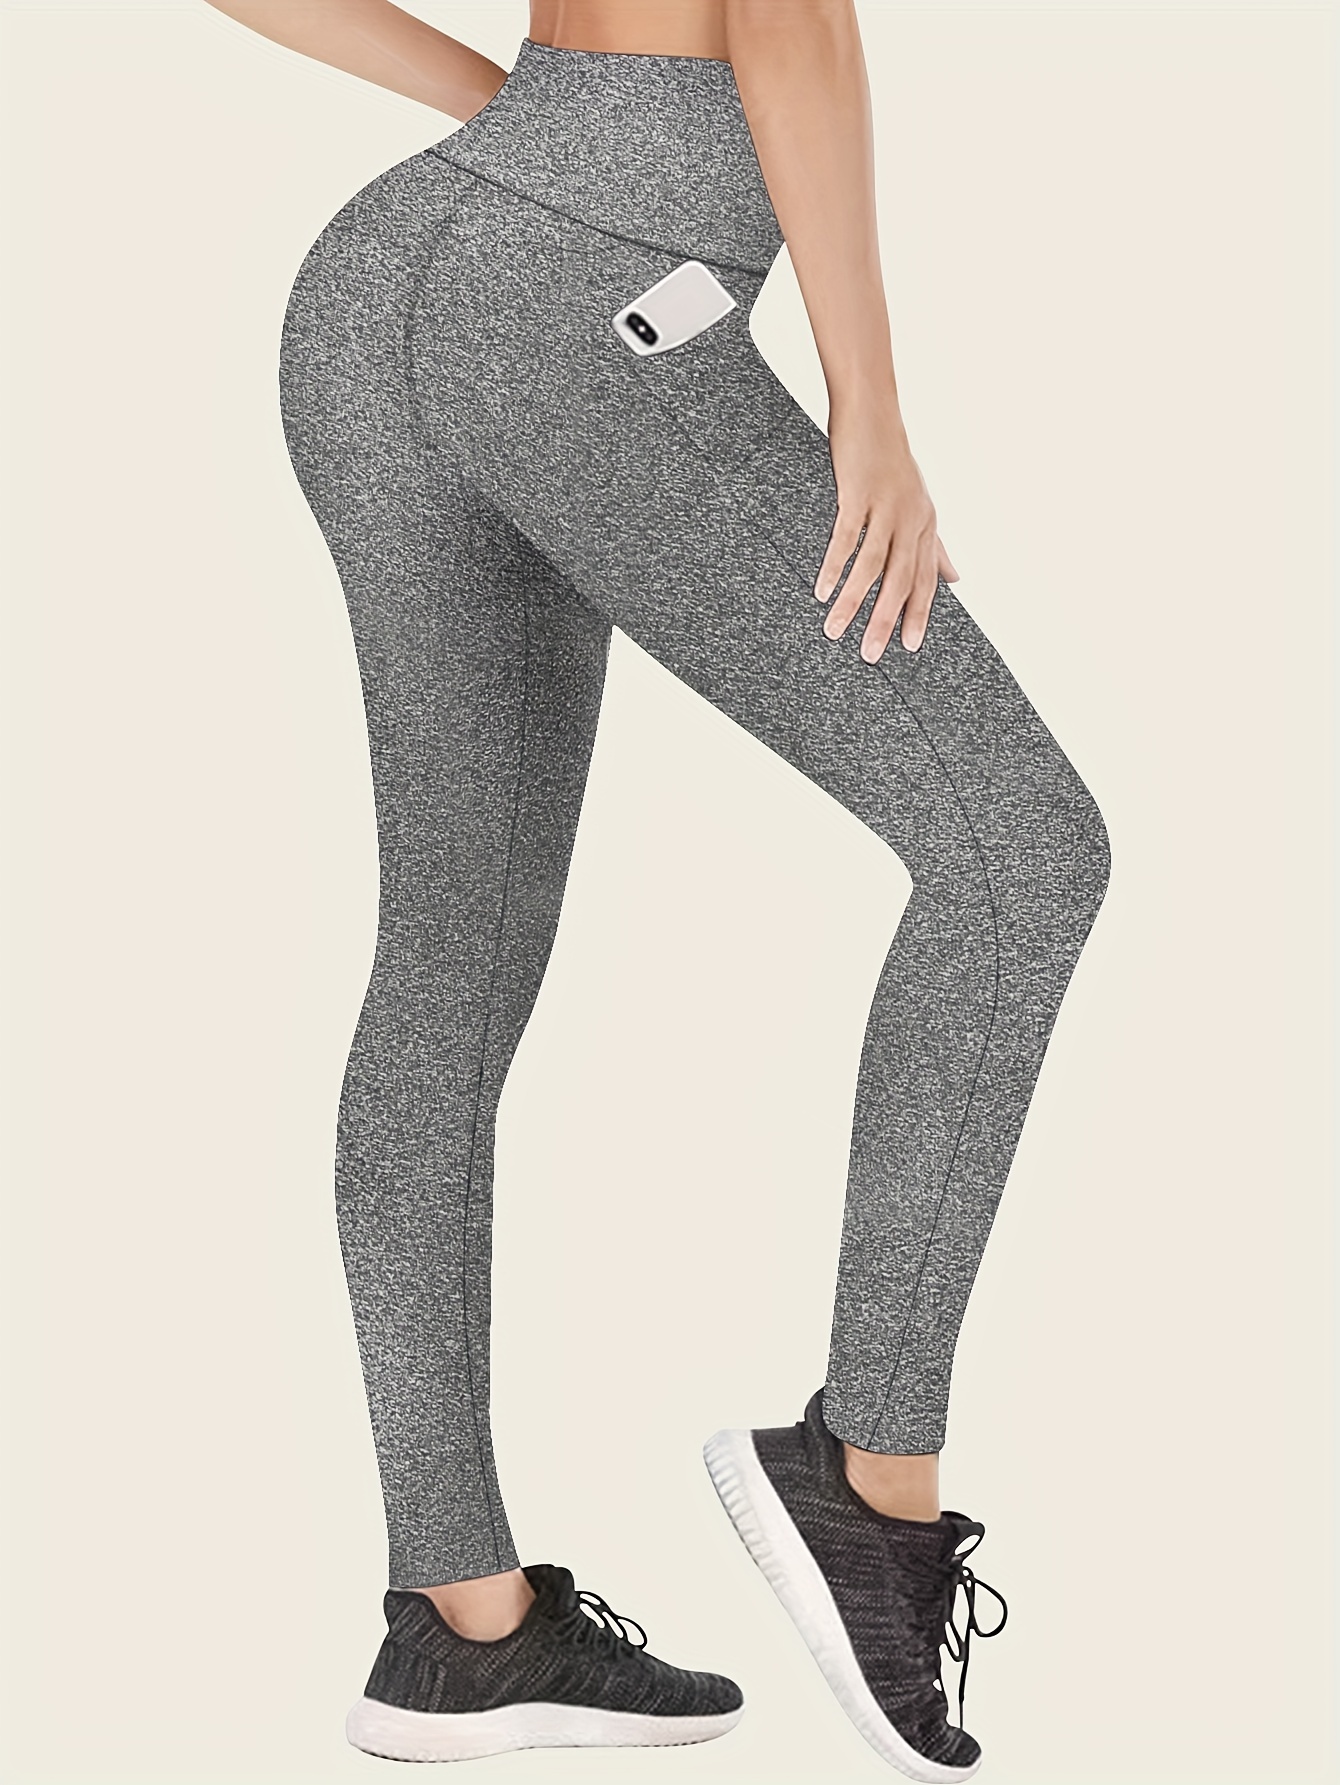 Fleece Lined Sport Pants for Women with Pockets, Winter Workout